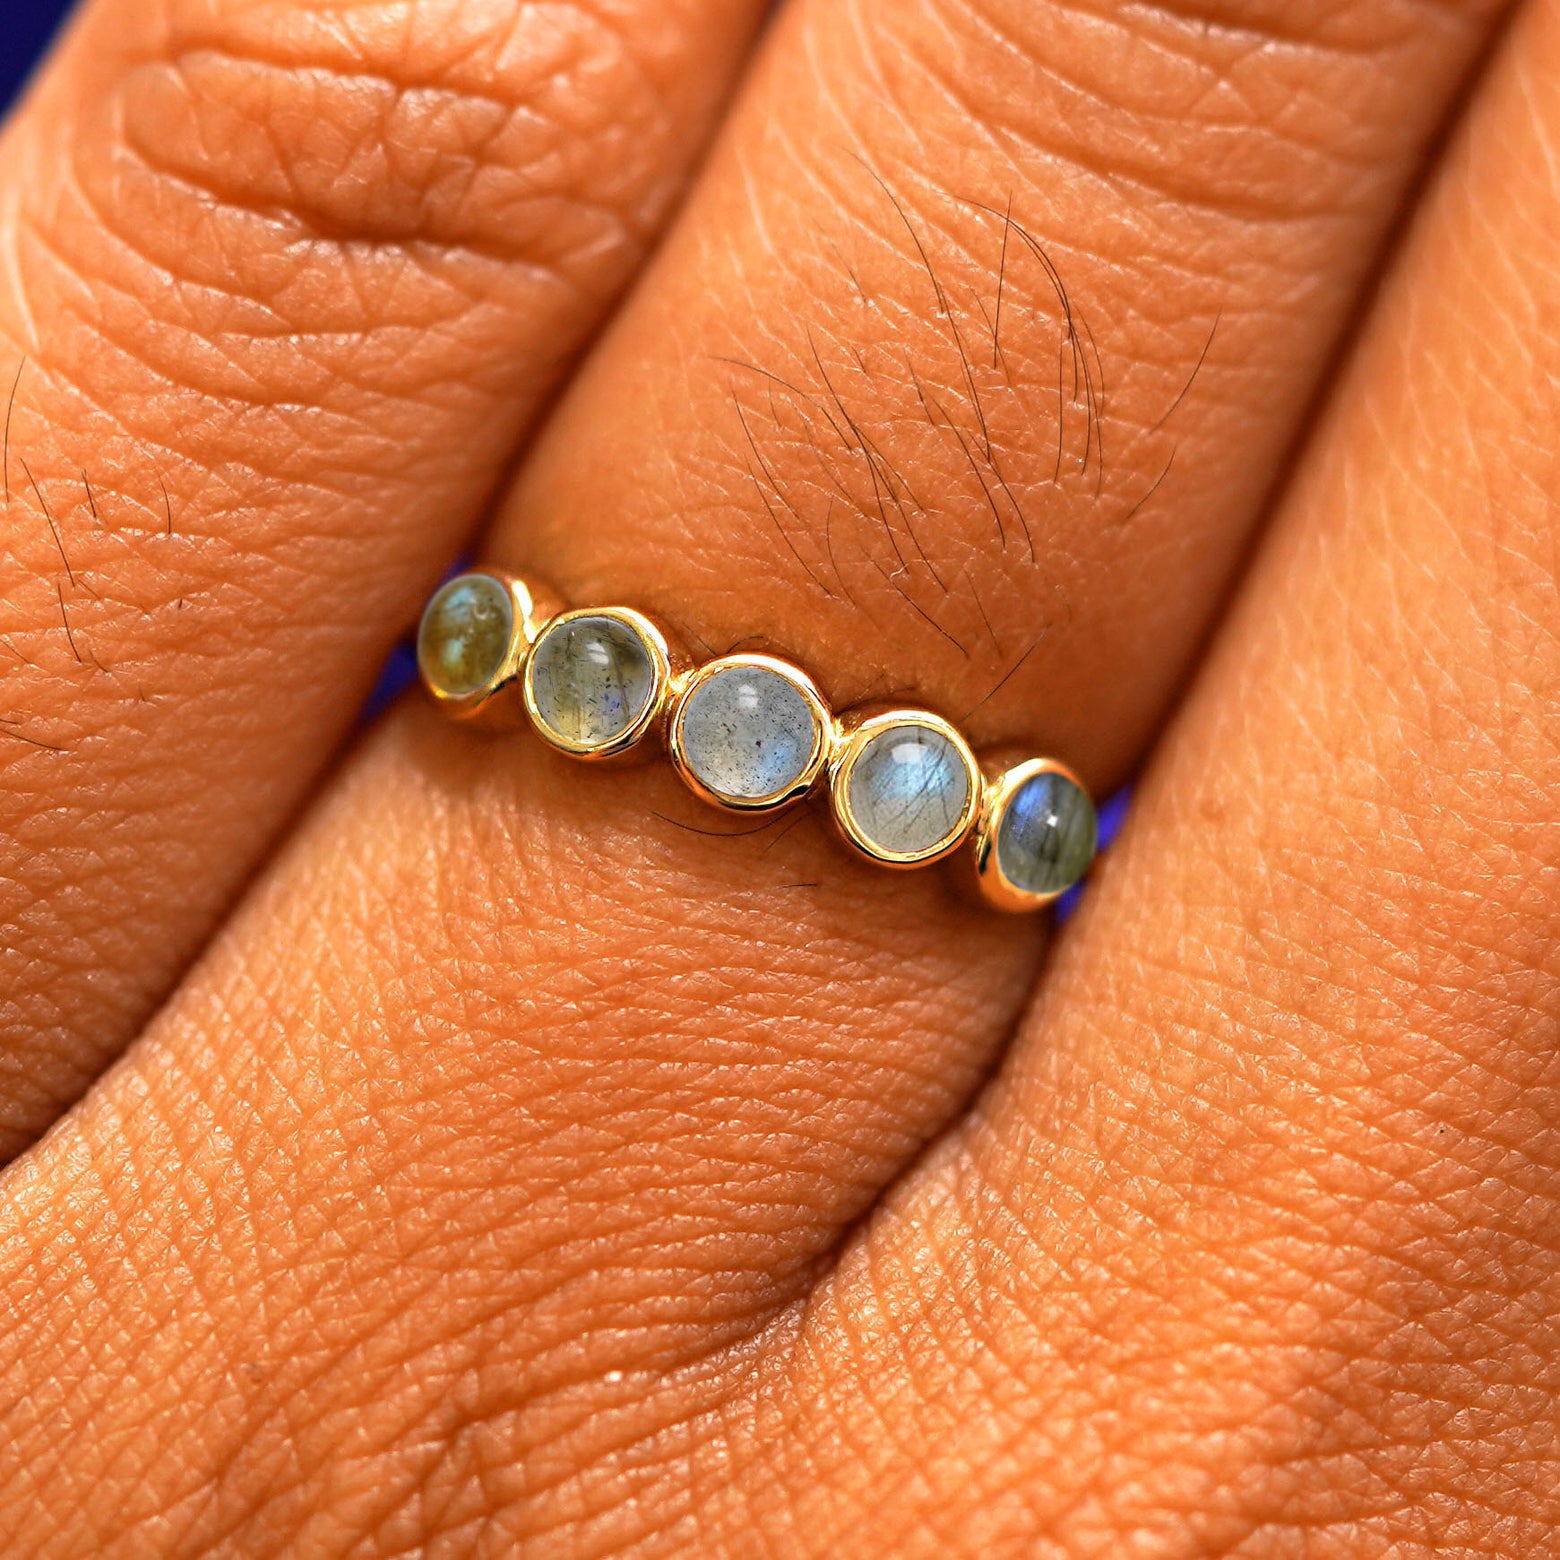 Close up view of a model's hand wearing a yellow gold 5 Gemstones Ring in labradorite